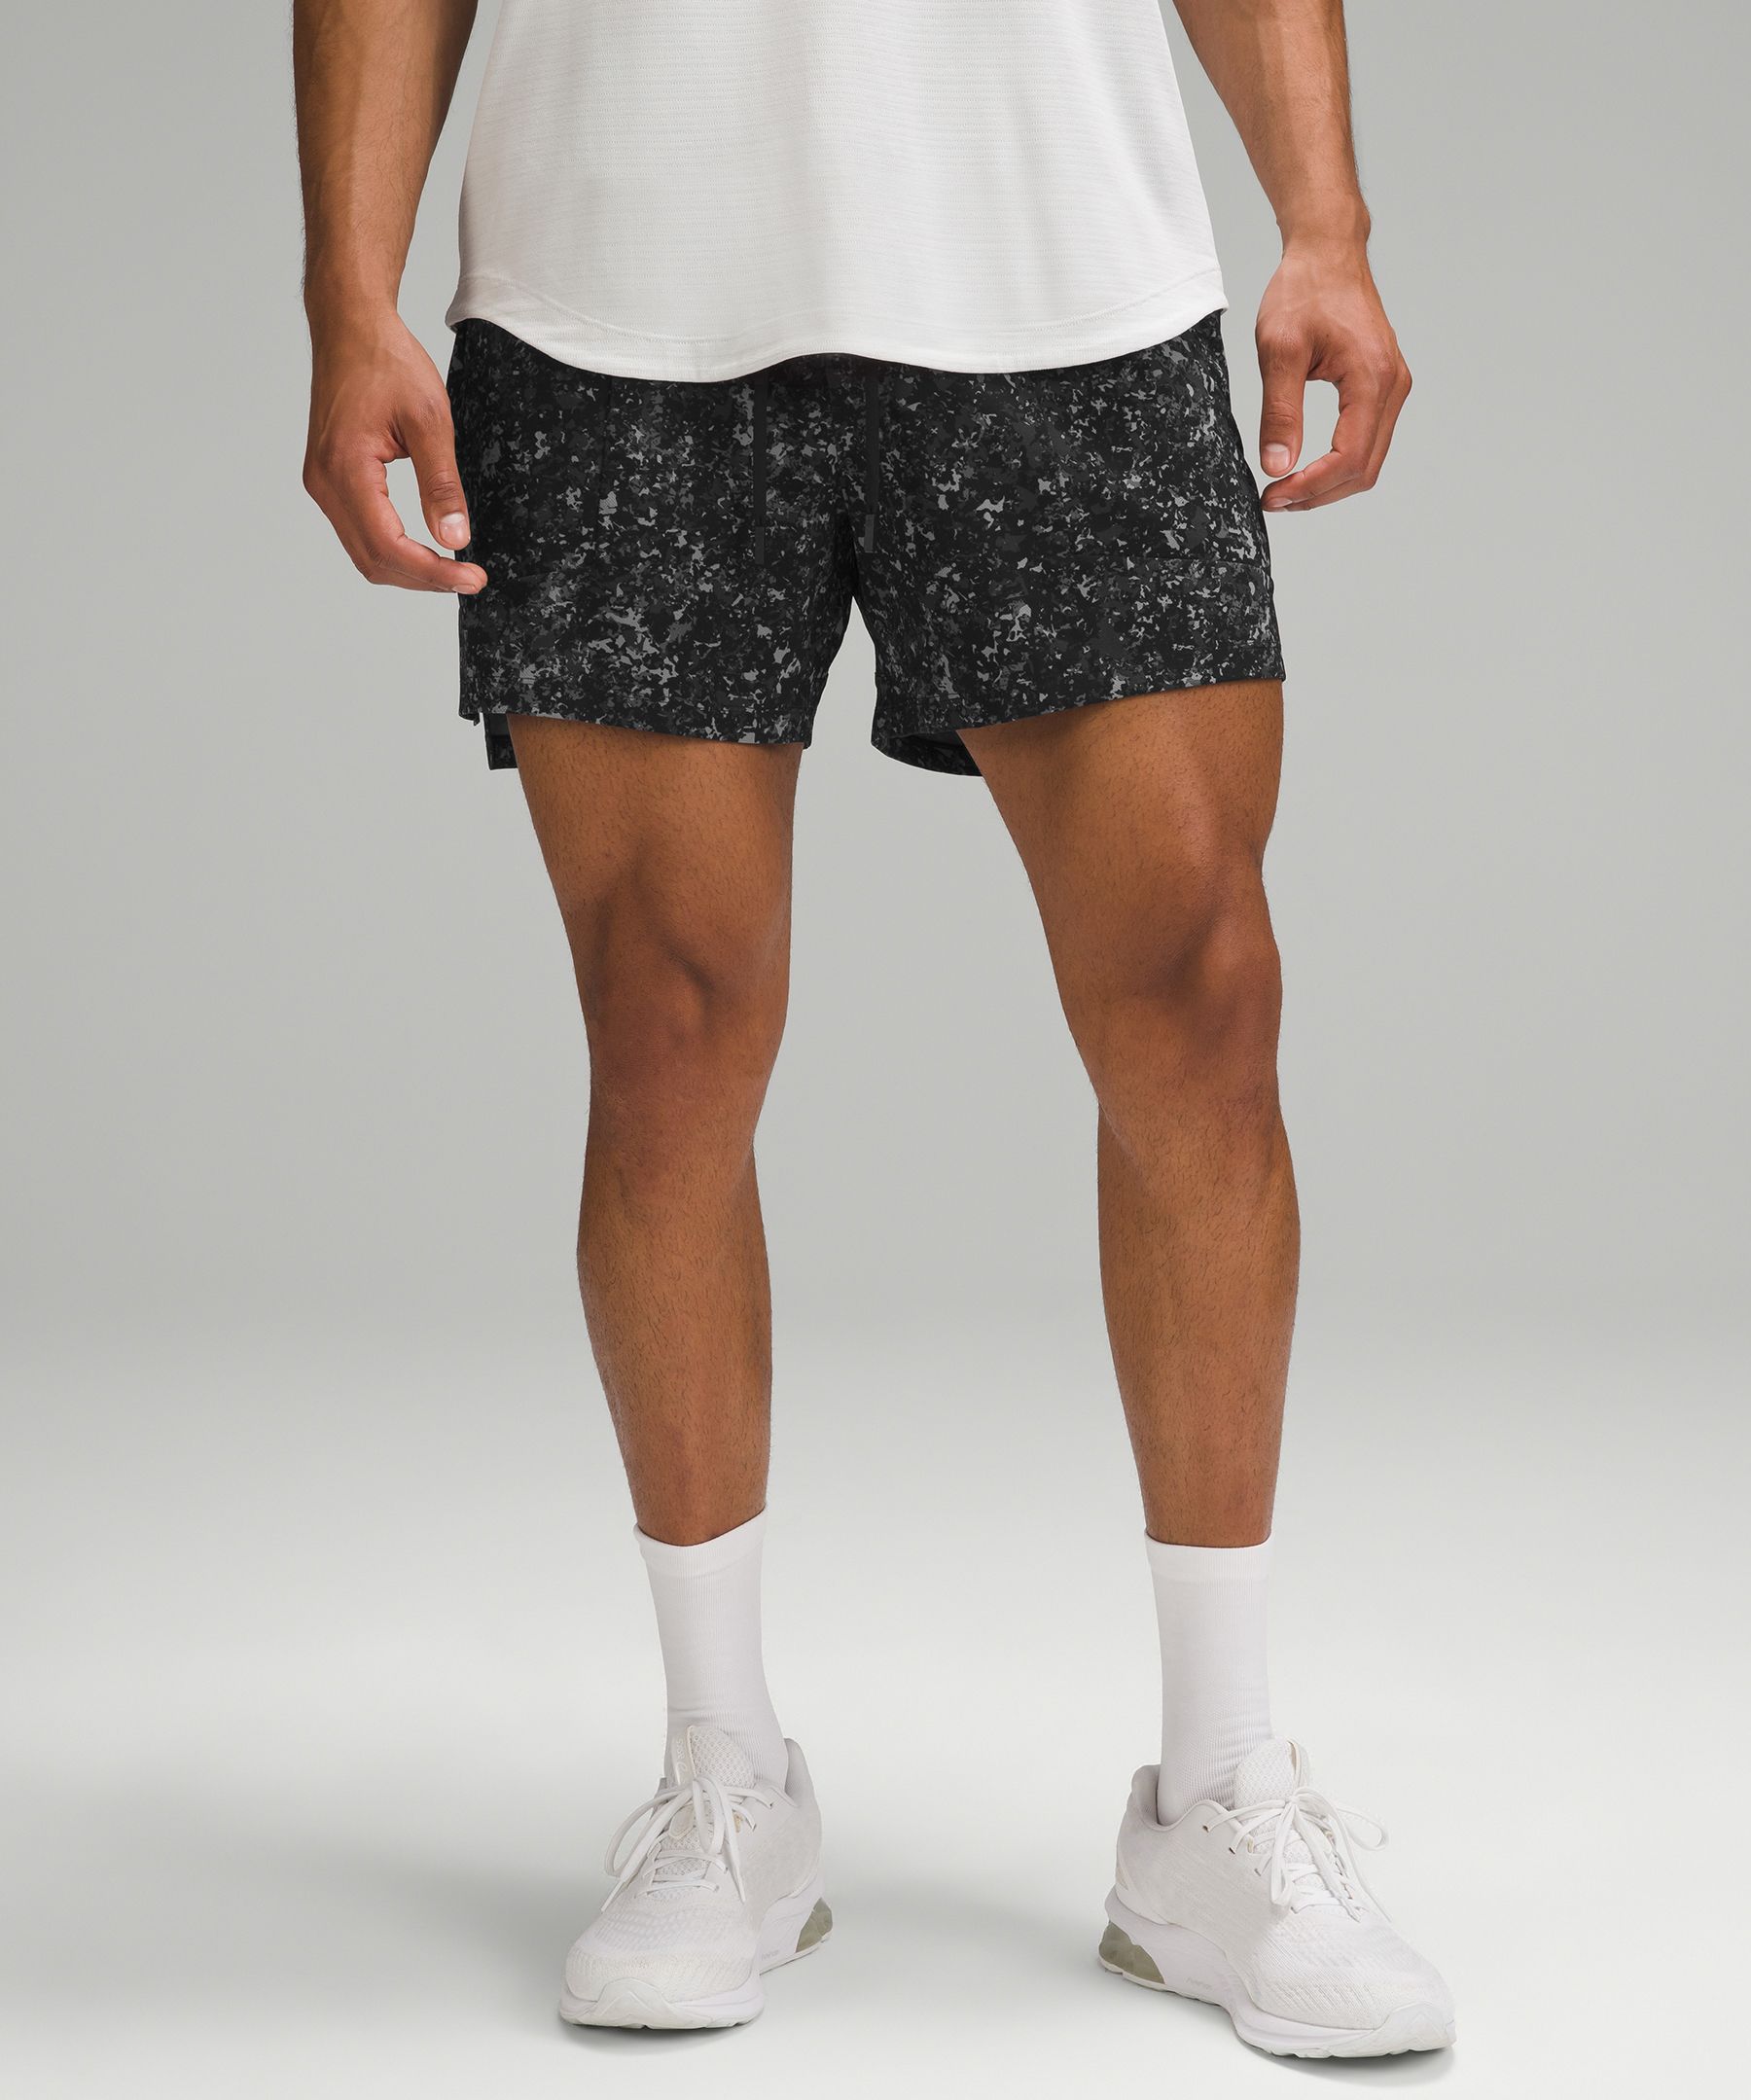 Where to Find Affordable Lululemon Shorts - Playbite